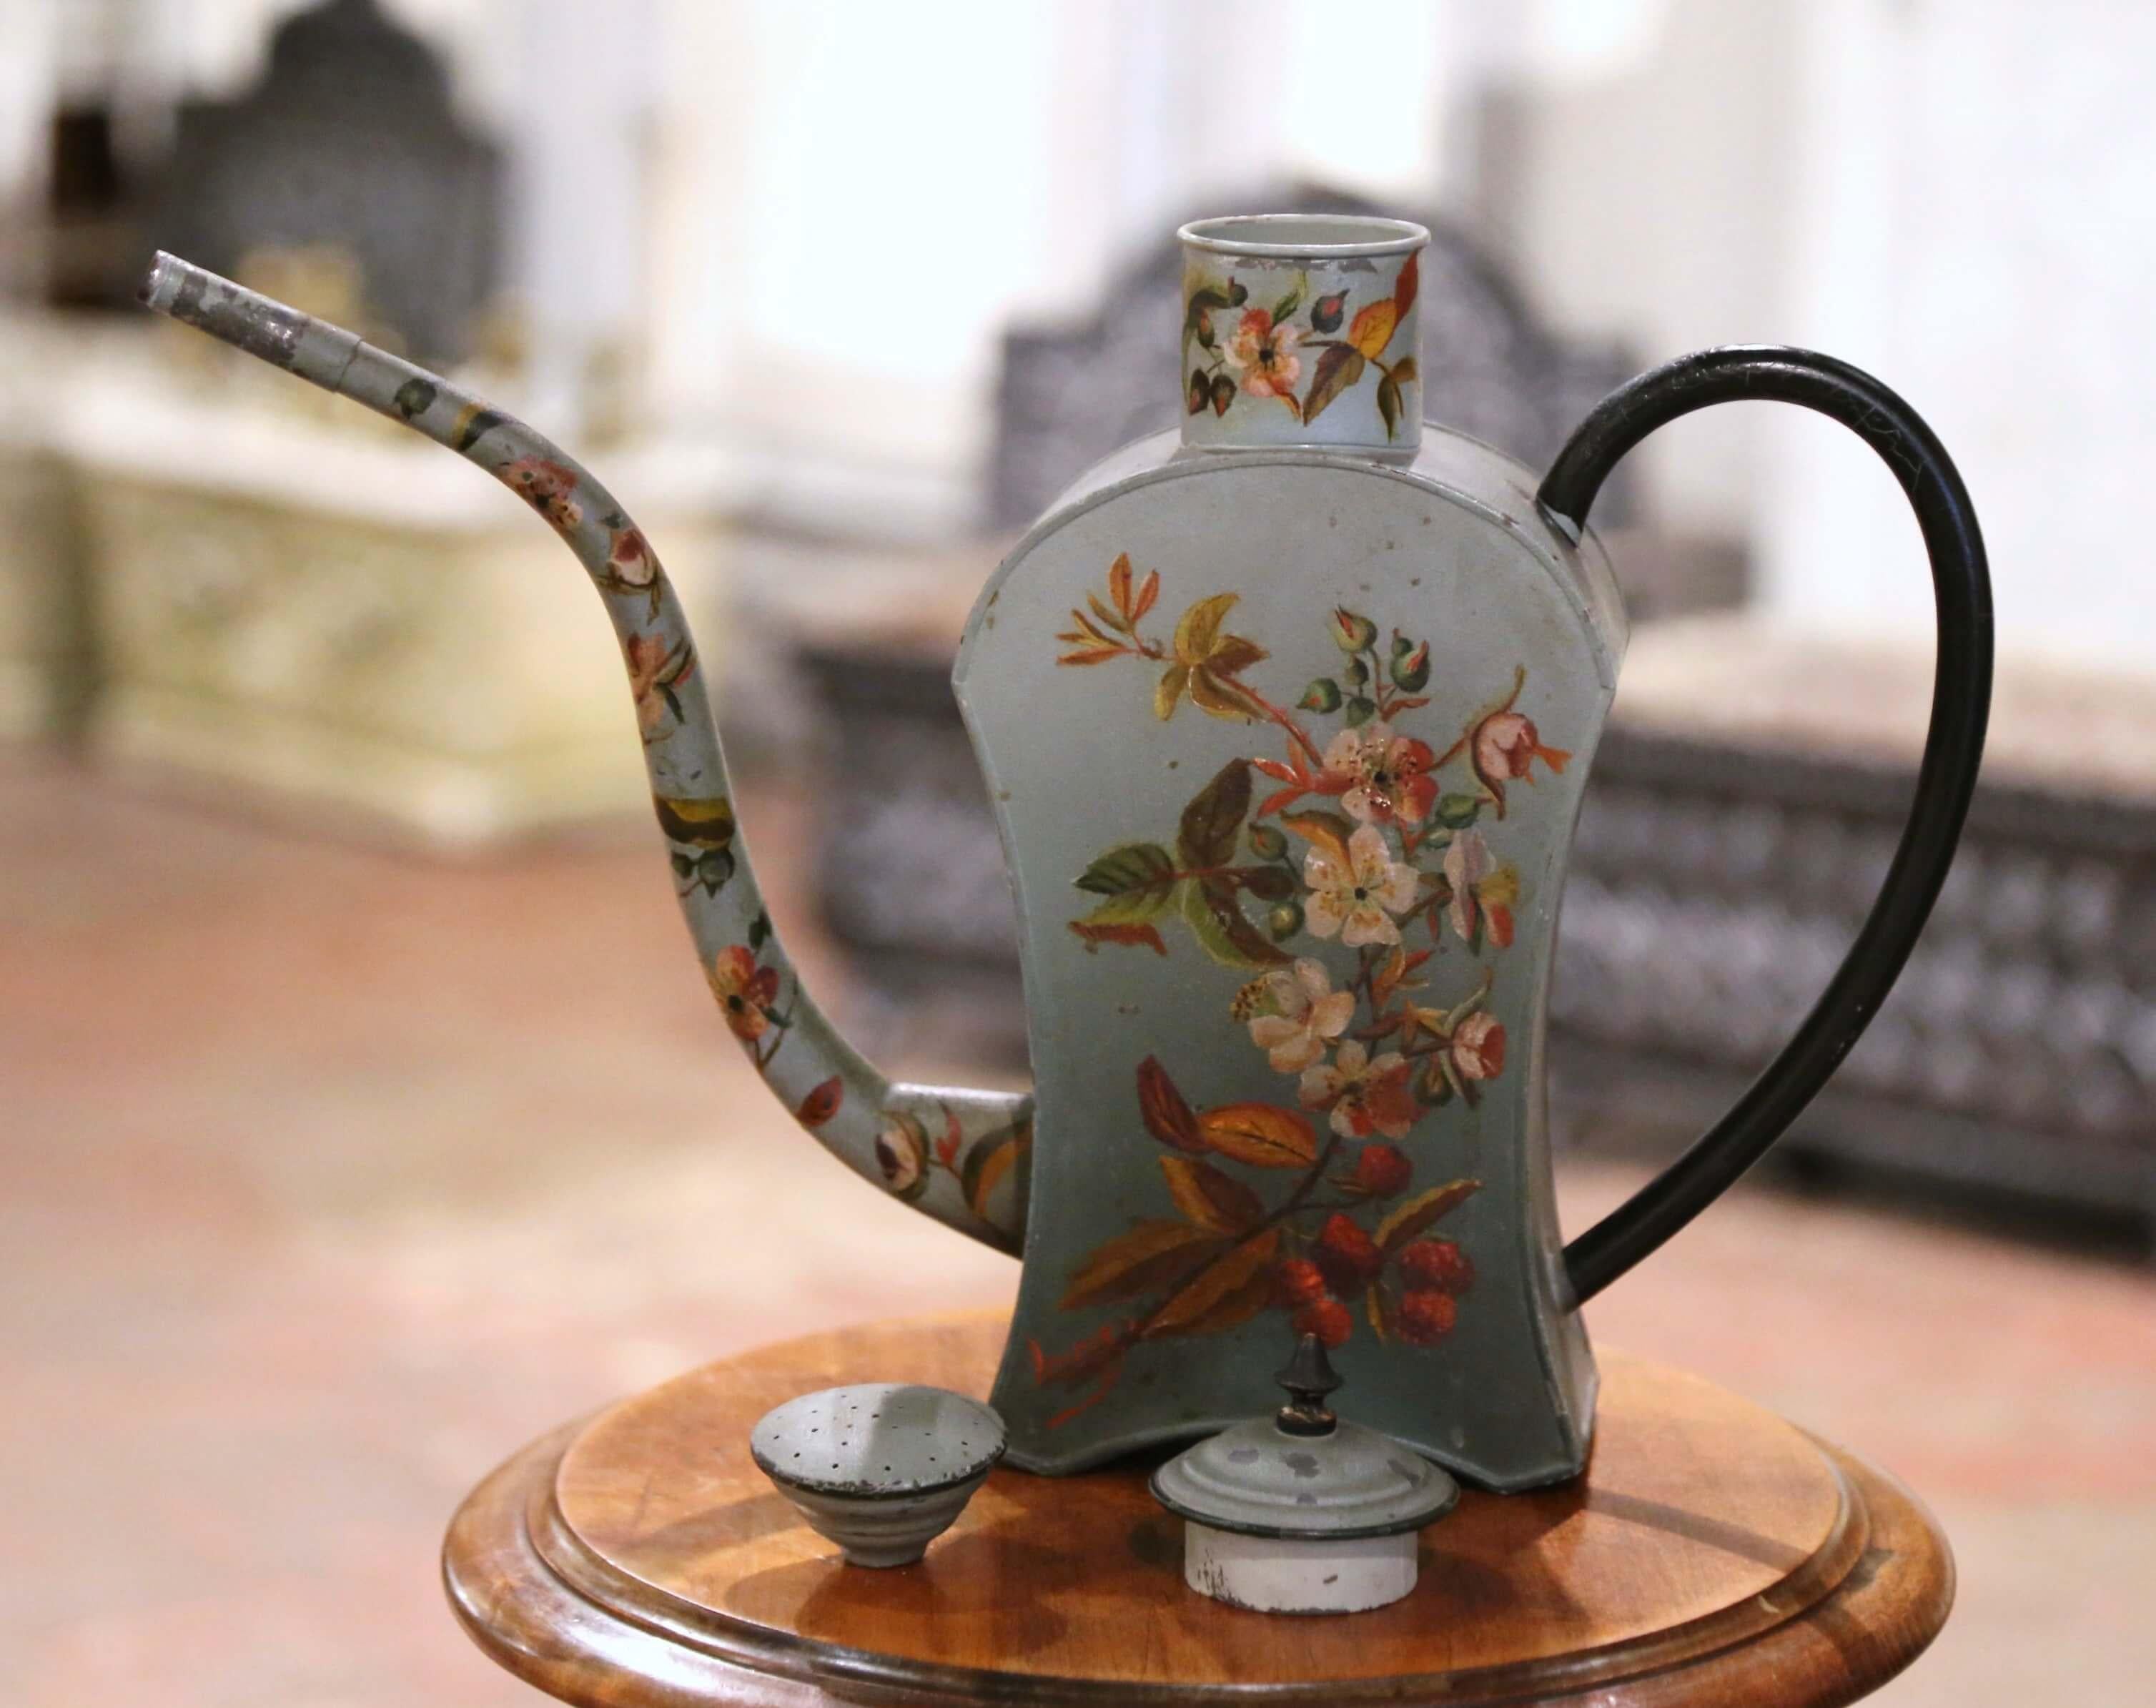 Decorate kitchen cabinets with this antique water can with its original removable lid! Hand crafted in France circa 1960, and built of metal, the tole construction gives this watering can a charming and unique character. Adorned with hand-painted